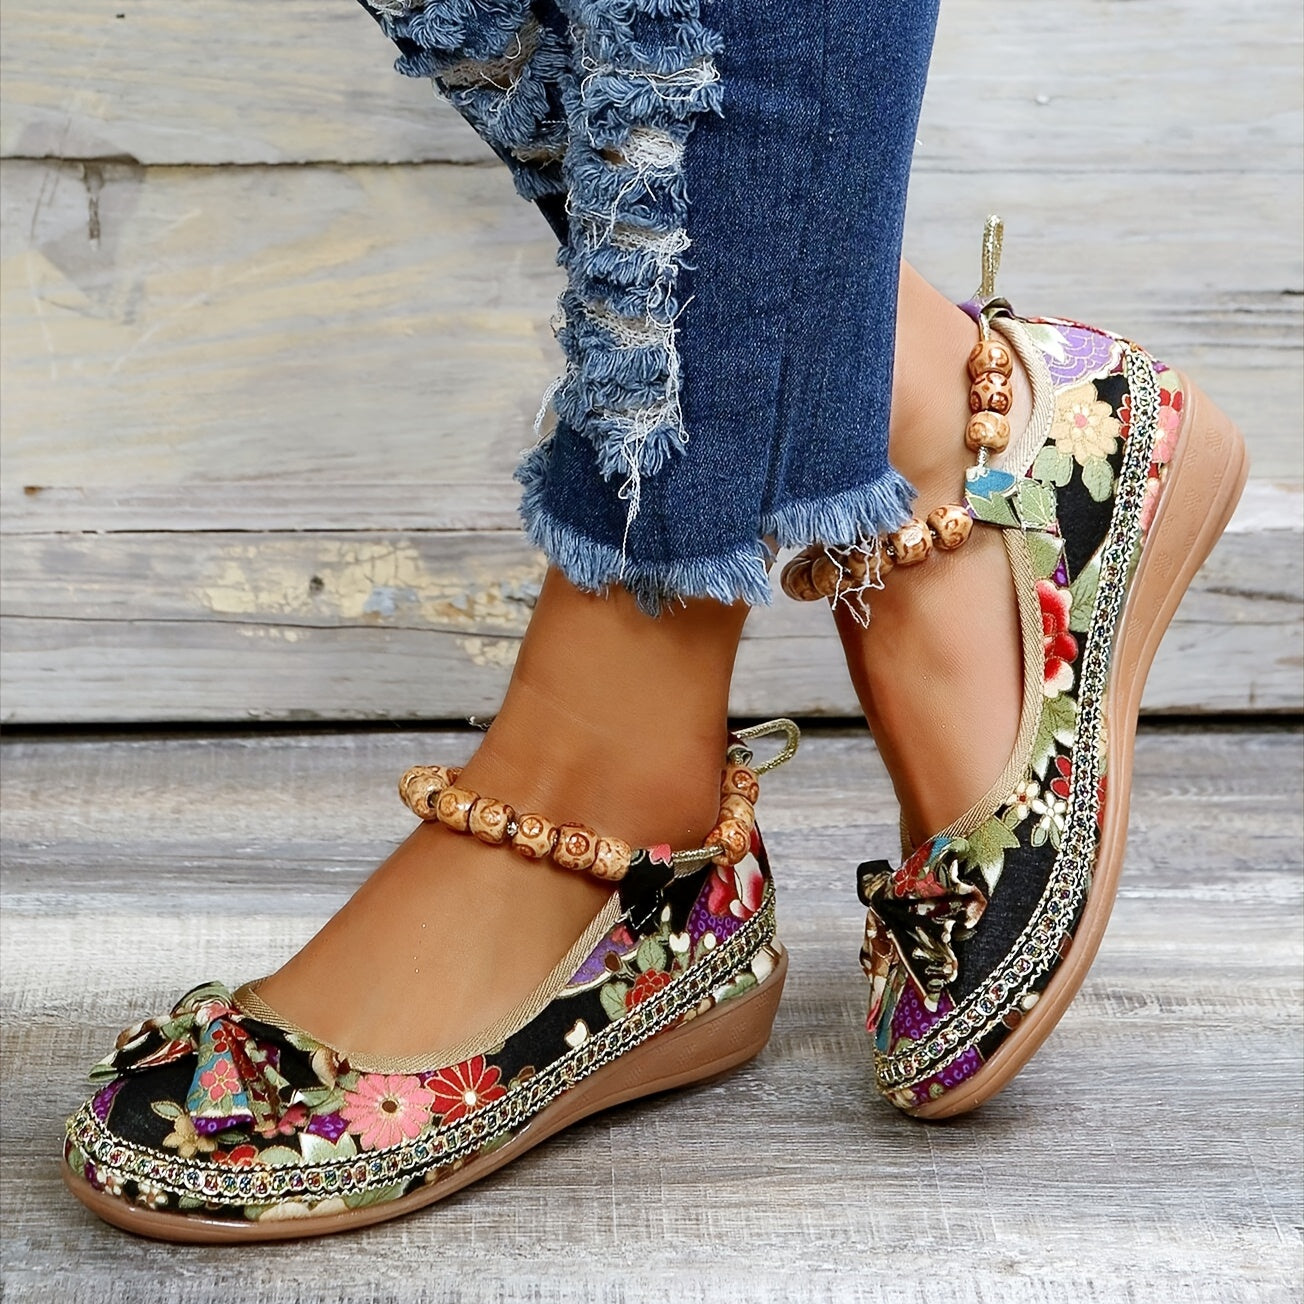 【Today's Special Price $35.99】🔥Women's Floral Print Flat Shoes